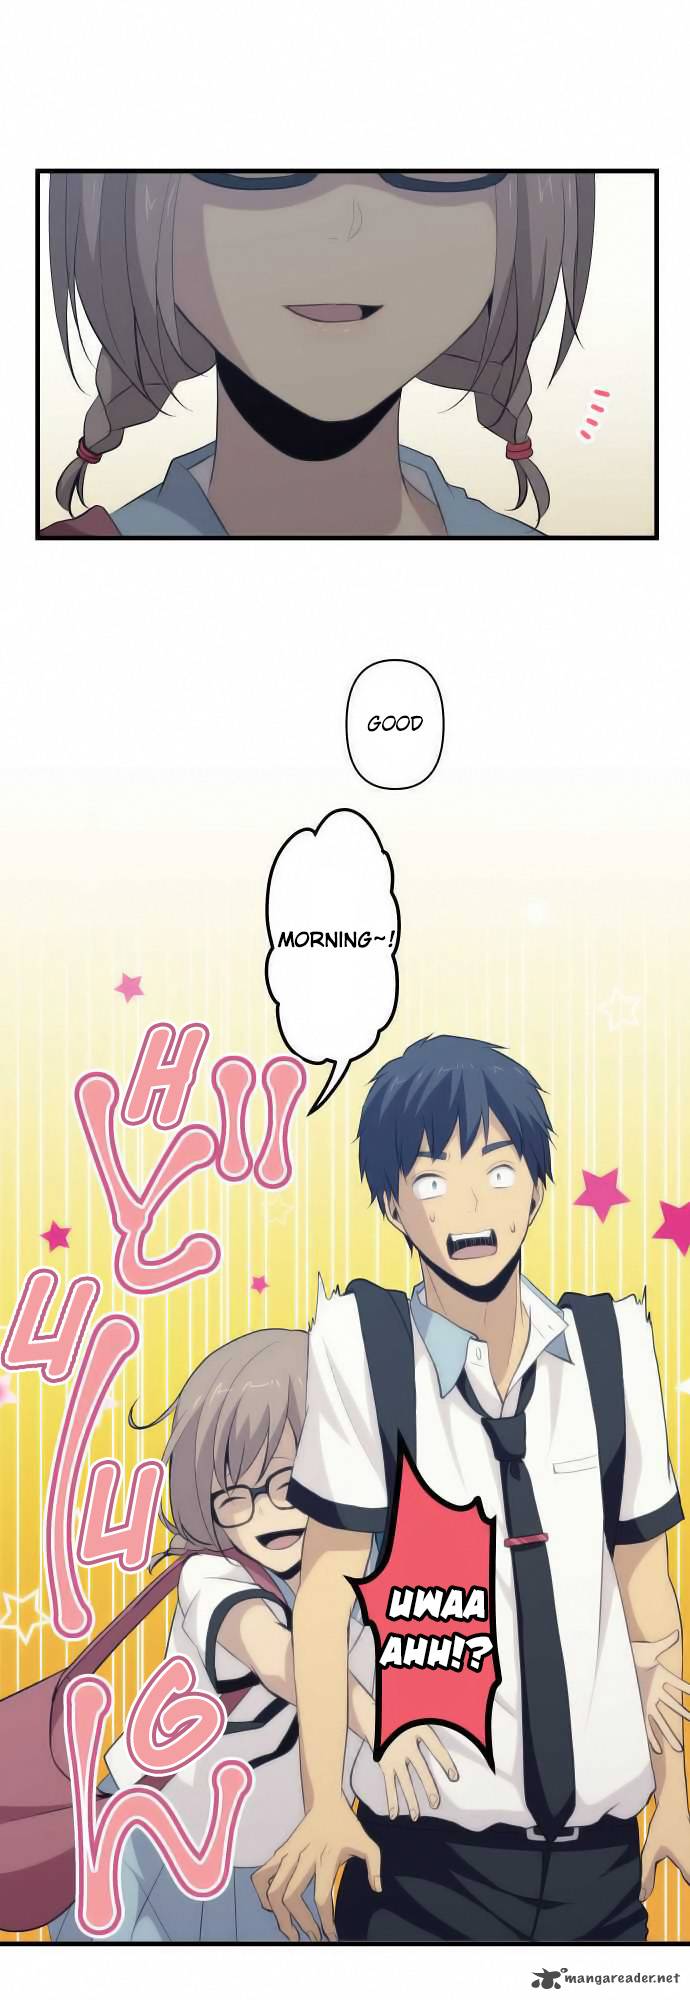 Relife 85 4